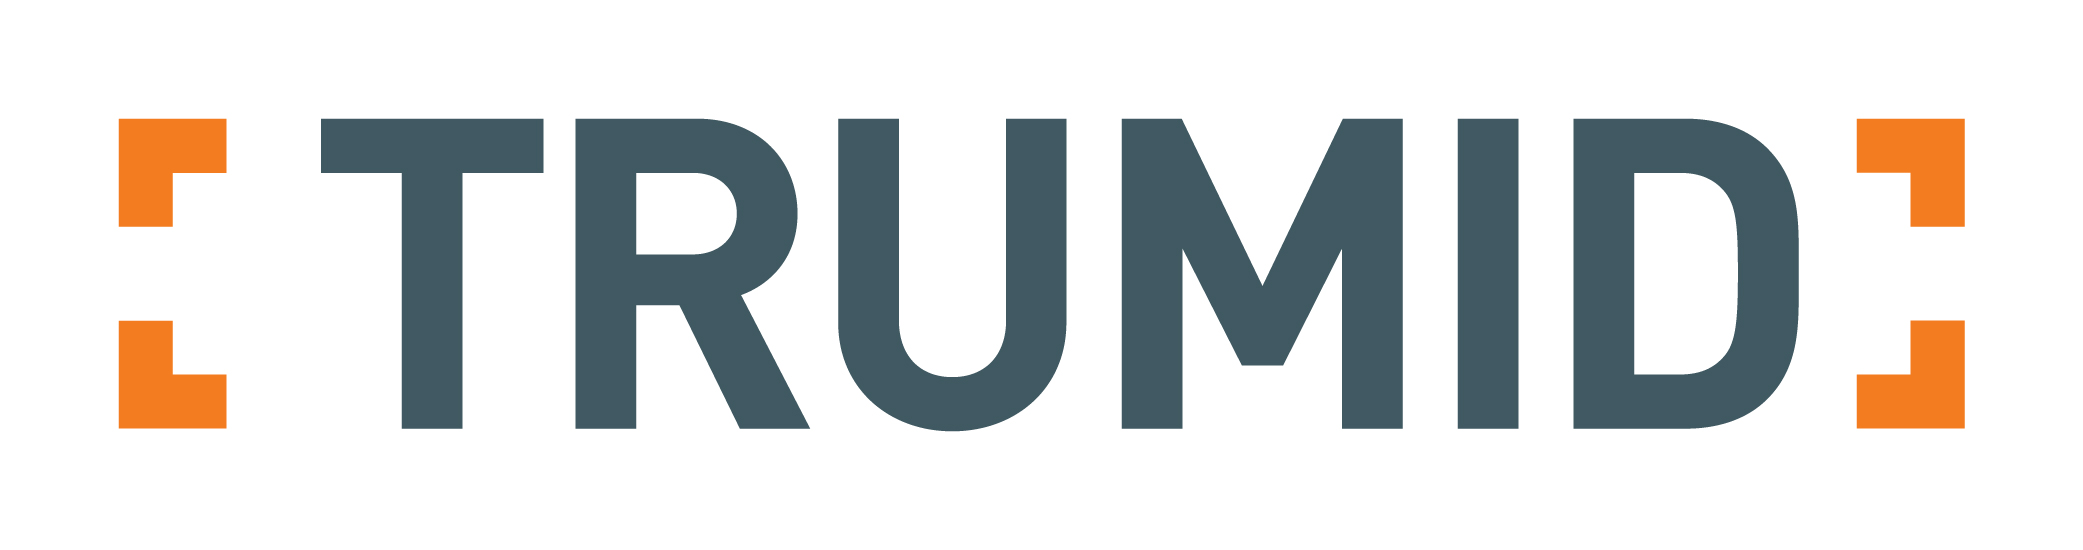 Trumid, a FINRA-registered broker dealer, provides an electronic credit trading and market intelligence platform designed to unlock liquidity for institutional clients. The company's platform allows users to transact directly with other buy-side and sell-side participants, collectively determine pricing and execute a transaction at the market-vetted price.